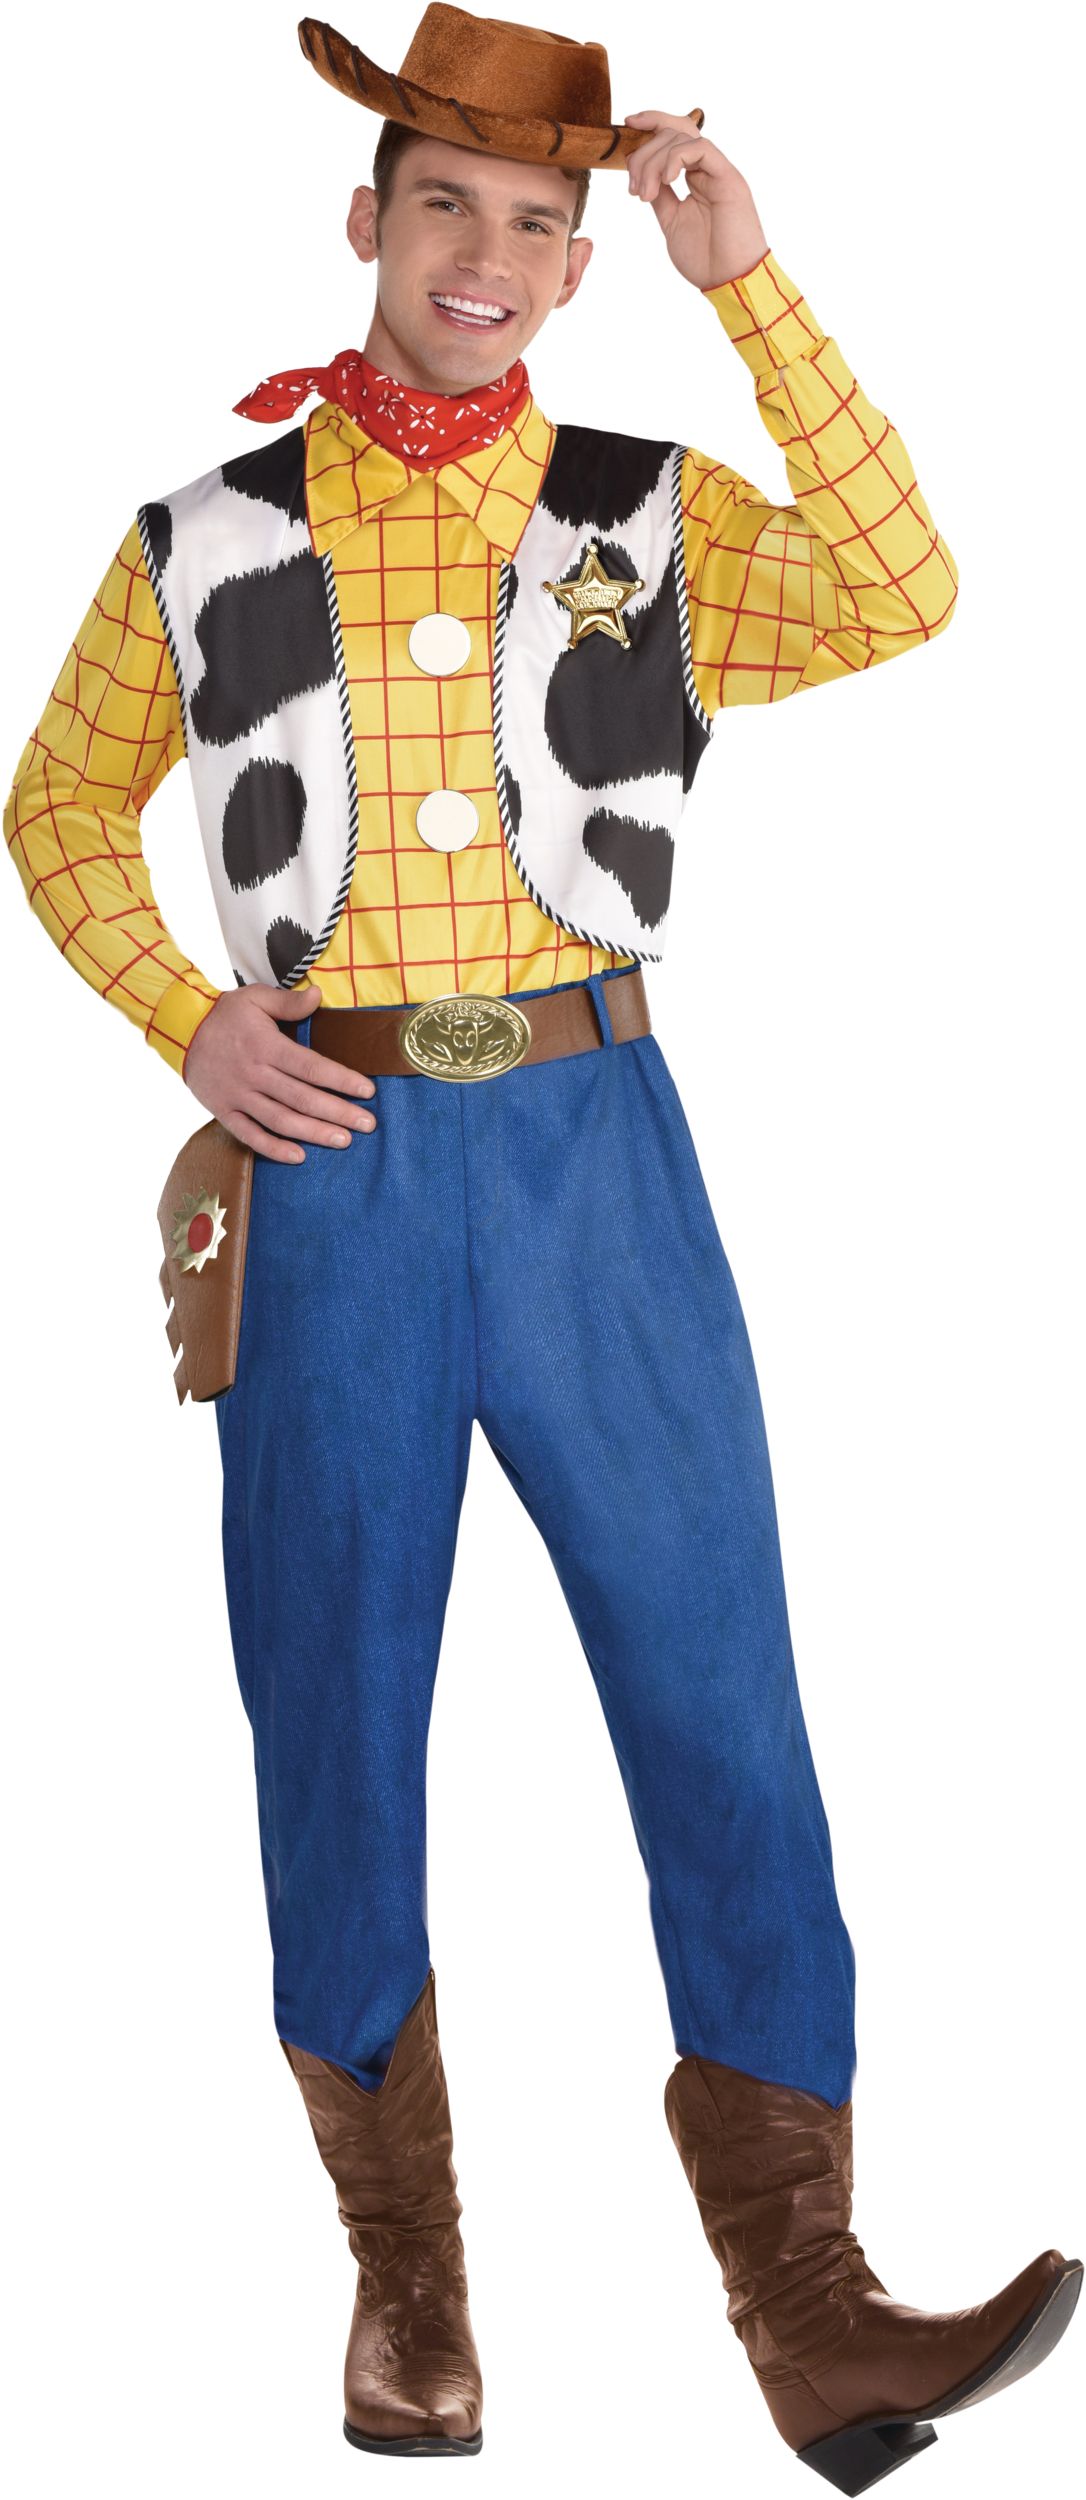 https://media-www.partycity.ca/product/seasonal-gardening/party-city-seasonal/party-city-halloween-and-fall-decor/8516477/adult-woody-costume-toy-story-4-standard-size-7b980490-2099-4624-9eee-a28d01178cff-jpgrendition.jpg